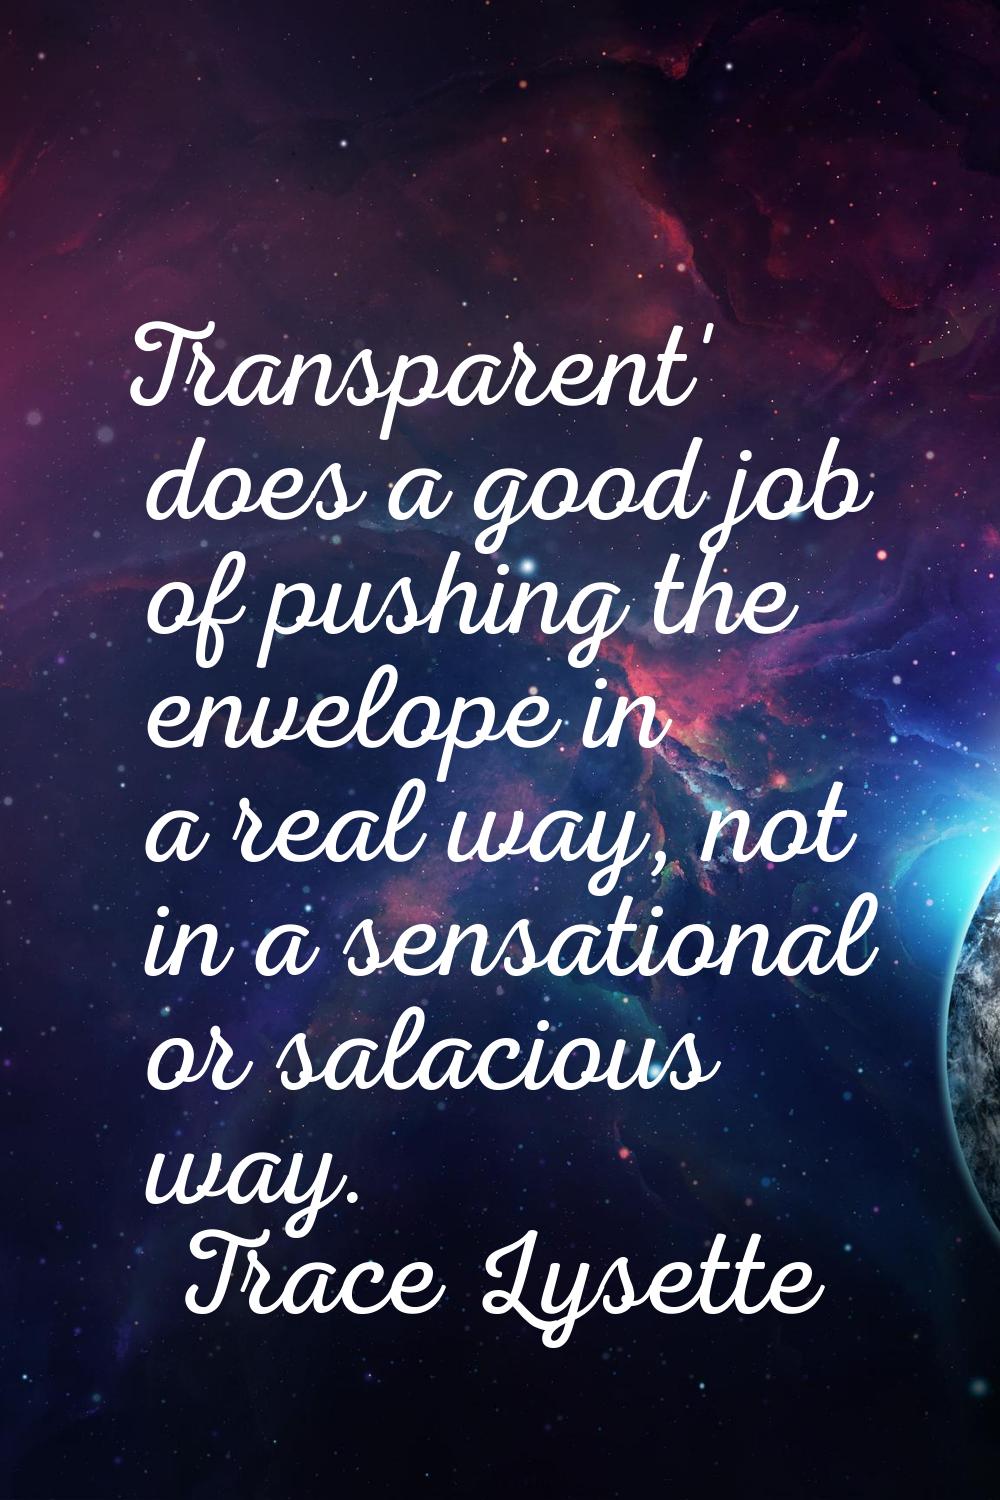 Transparent' does a good job of pushing the envelope in a real way, not in a sensational or salacio